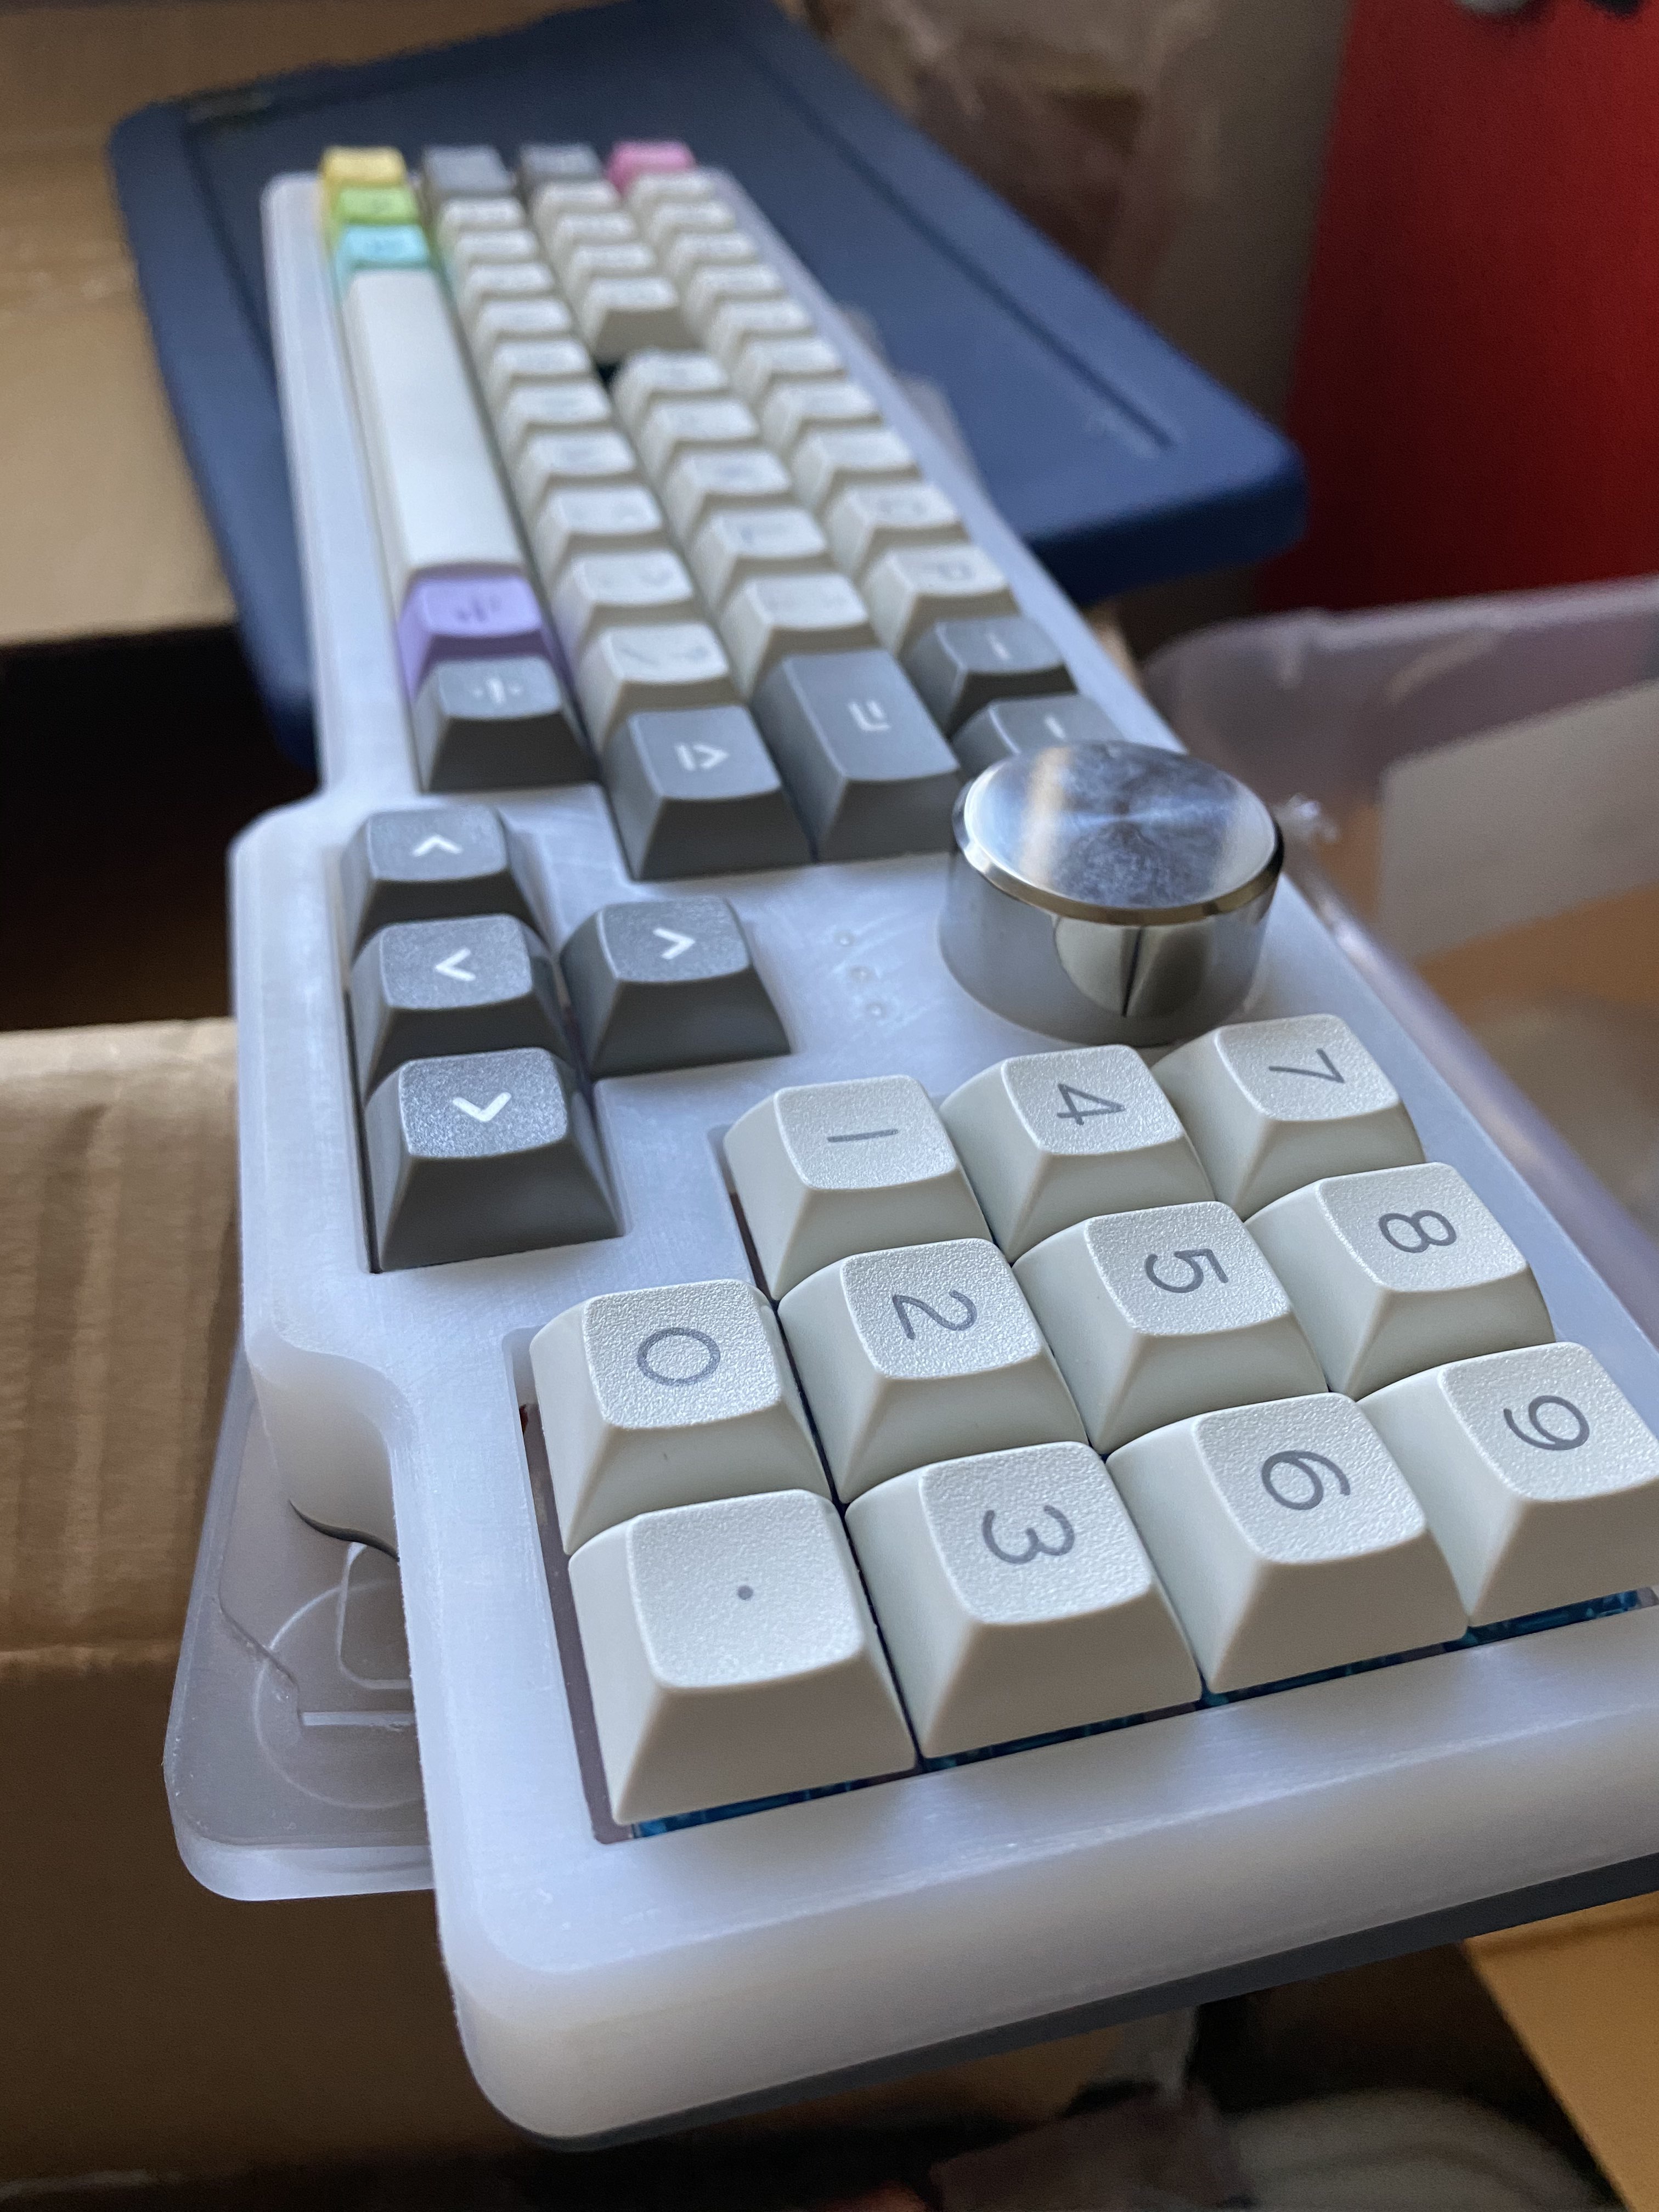 Prototype Garbage Truck case made from milled UHMWPE with a gray anodized aluminum bottom and DSA Paperwork keycaps